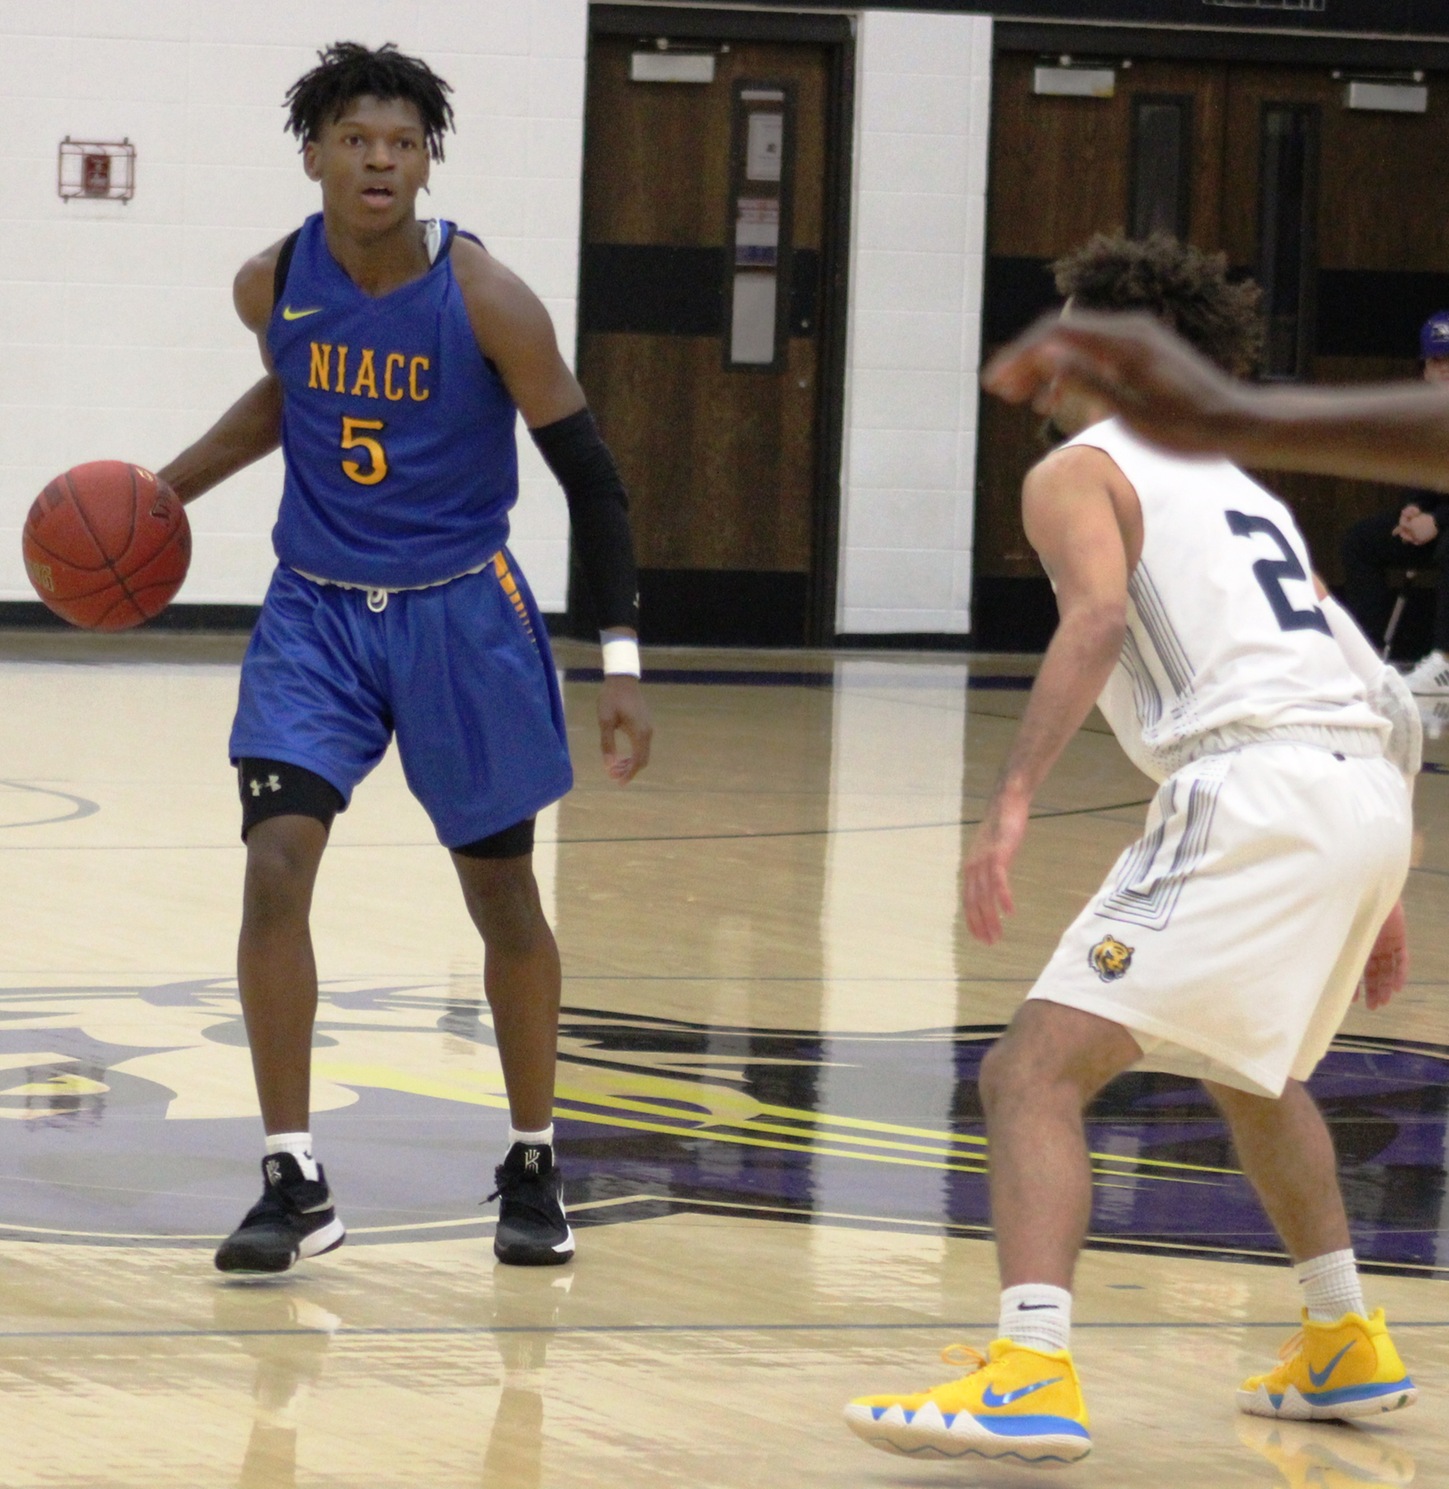 NIACC's Quentin Hardrict brings the ball up court against Marshalltown CC at the Dale Howard Classic earlier this season.